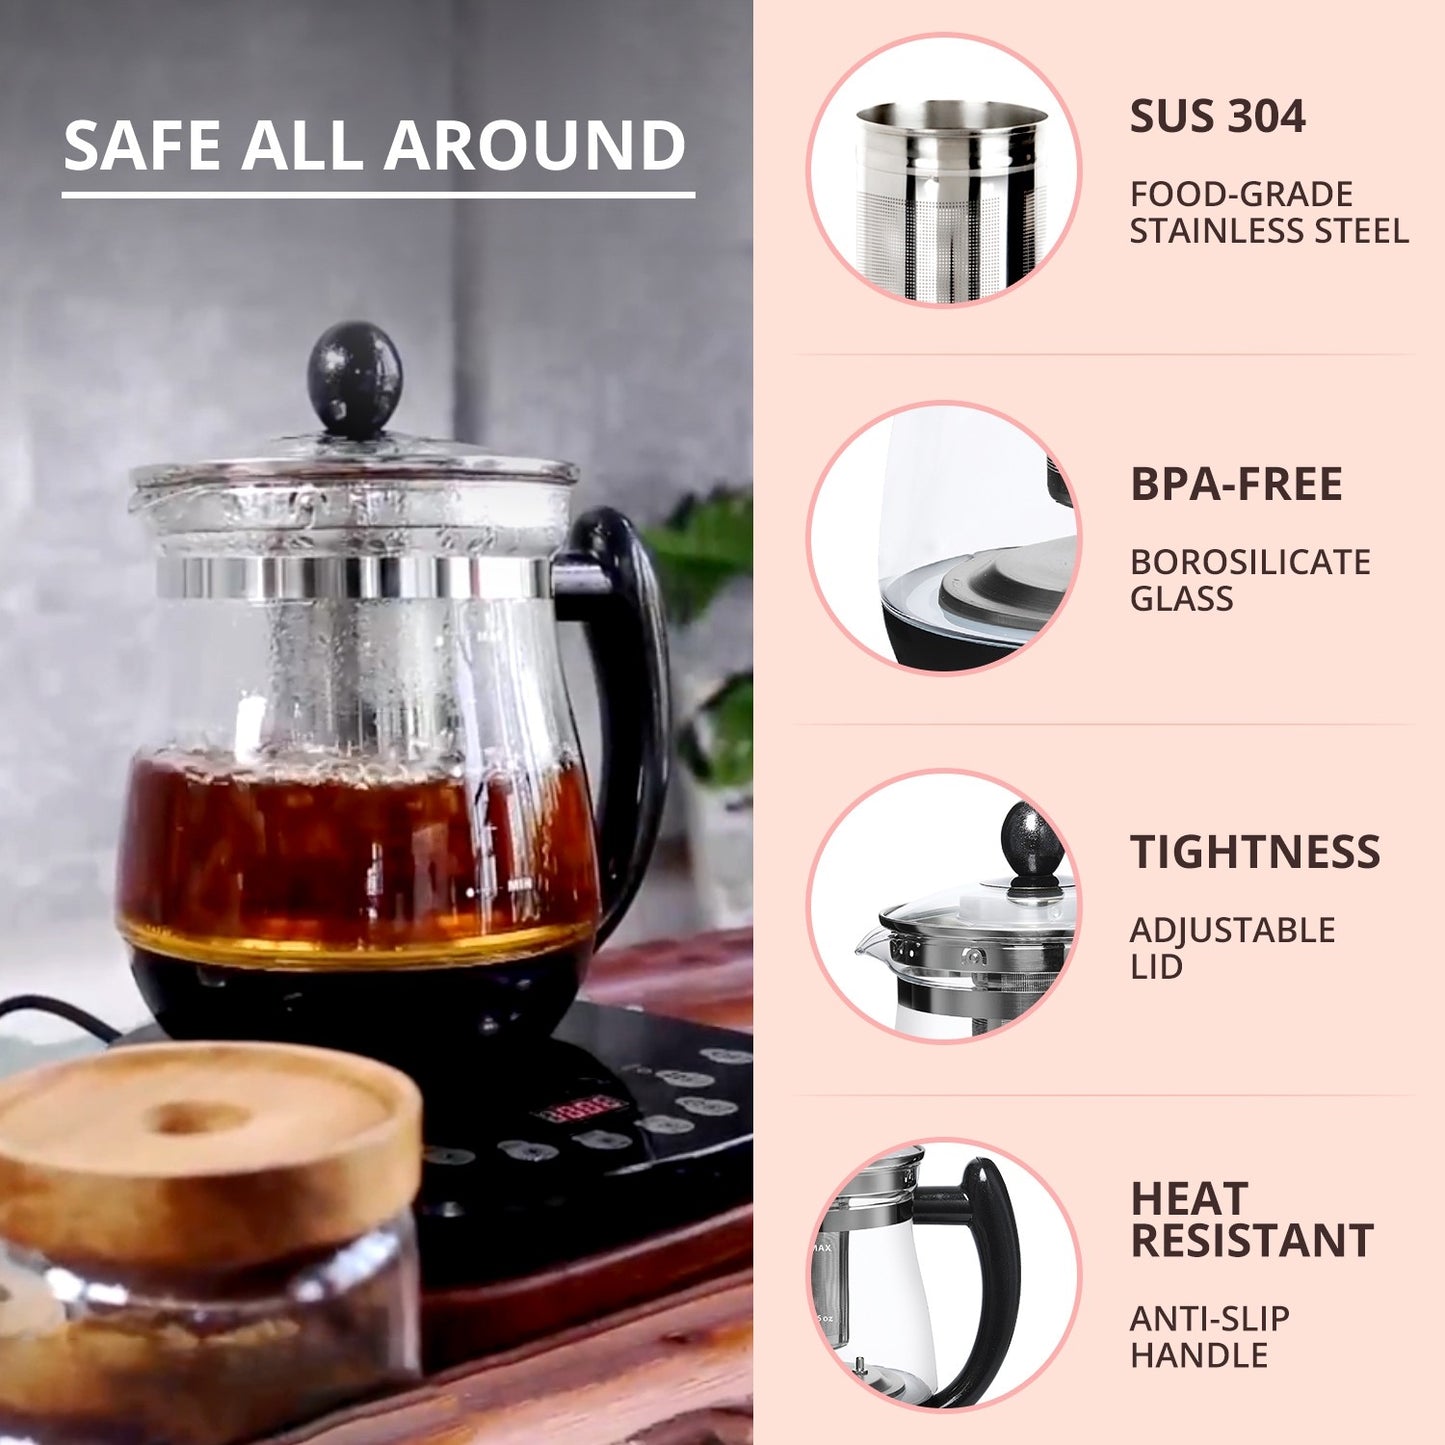 [BANU] Smart Teapot Electric Tea Kettle 1.8L Glass Teapot with One Touch